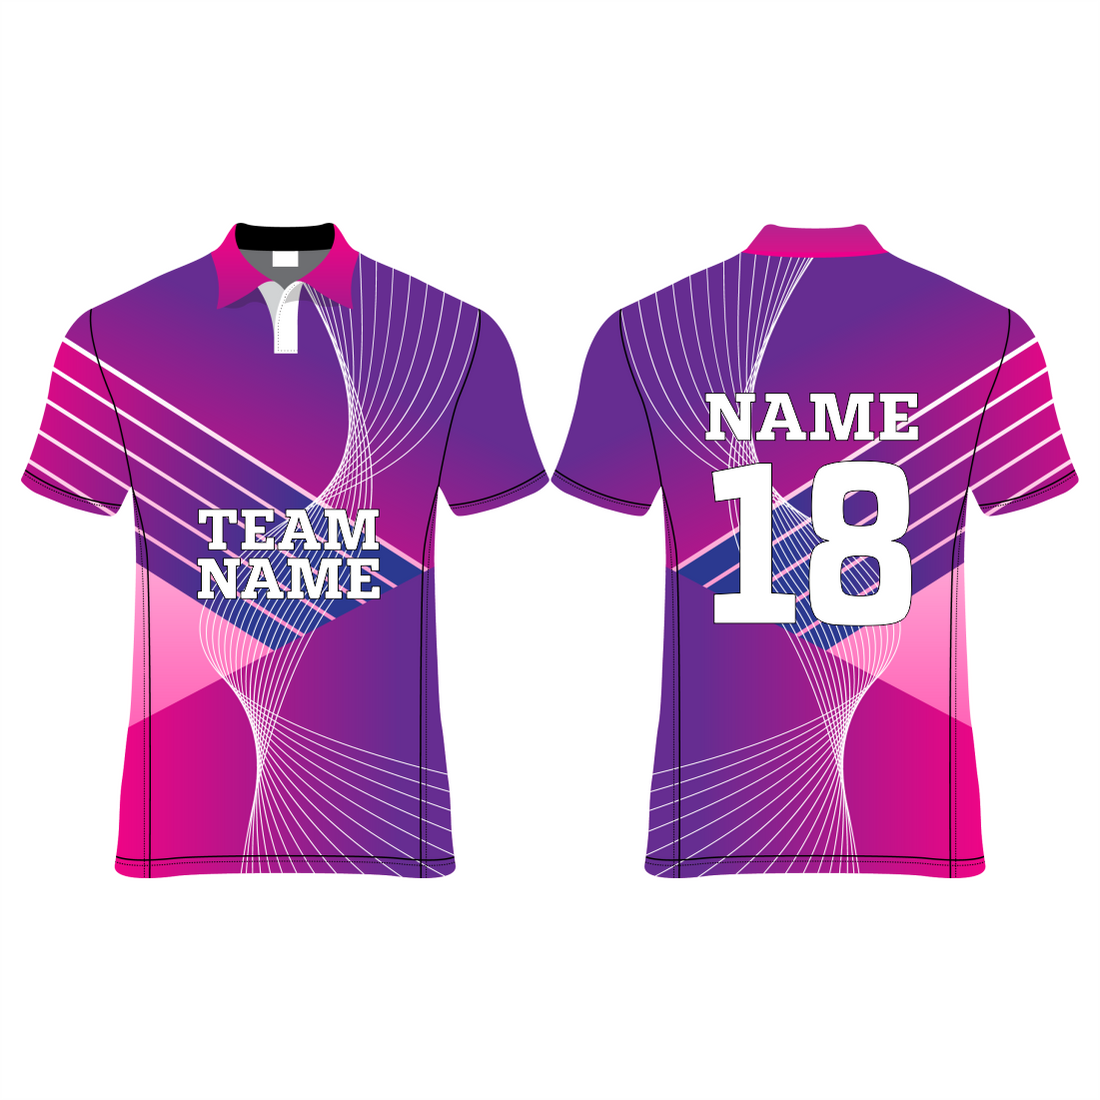 NEXT PRINT All Over Printed Customized Sublimation T-Shirt Unisex Sports Jersey Player Nam.1925106728e & Number, Team Name .